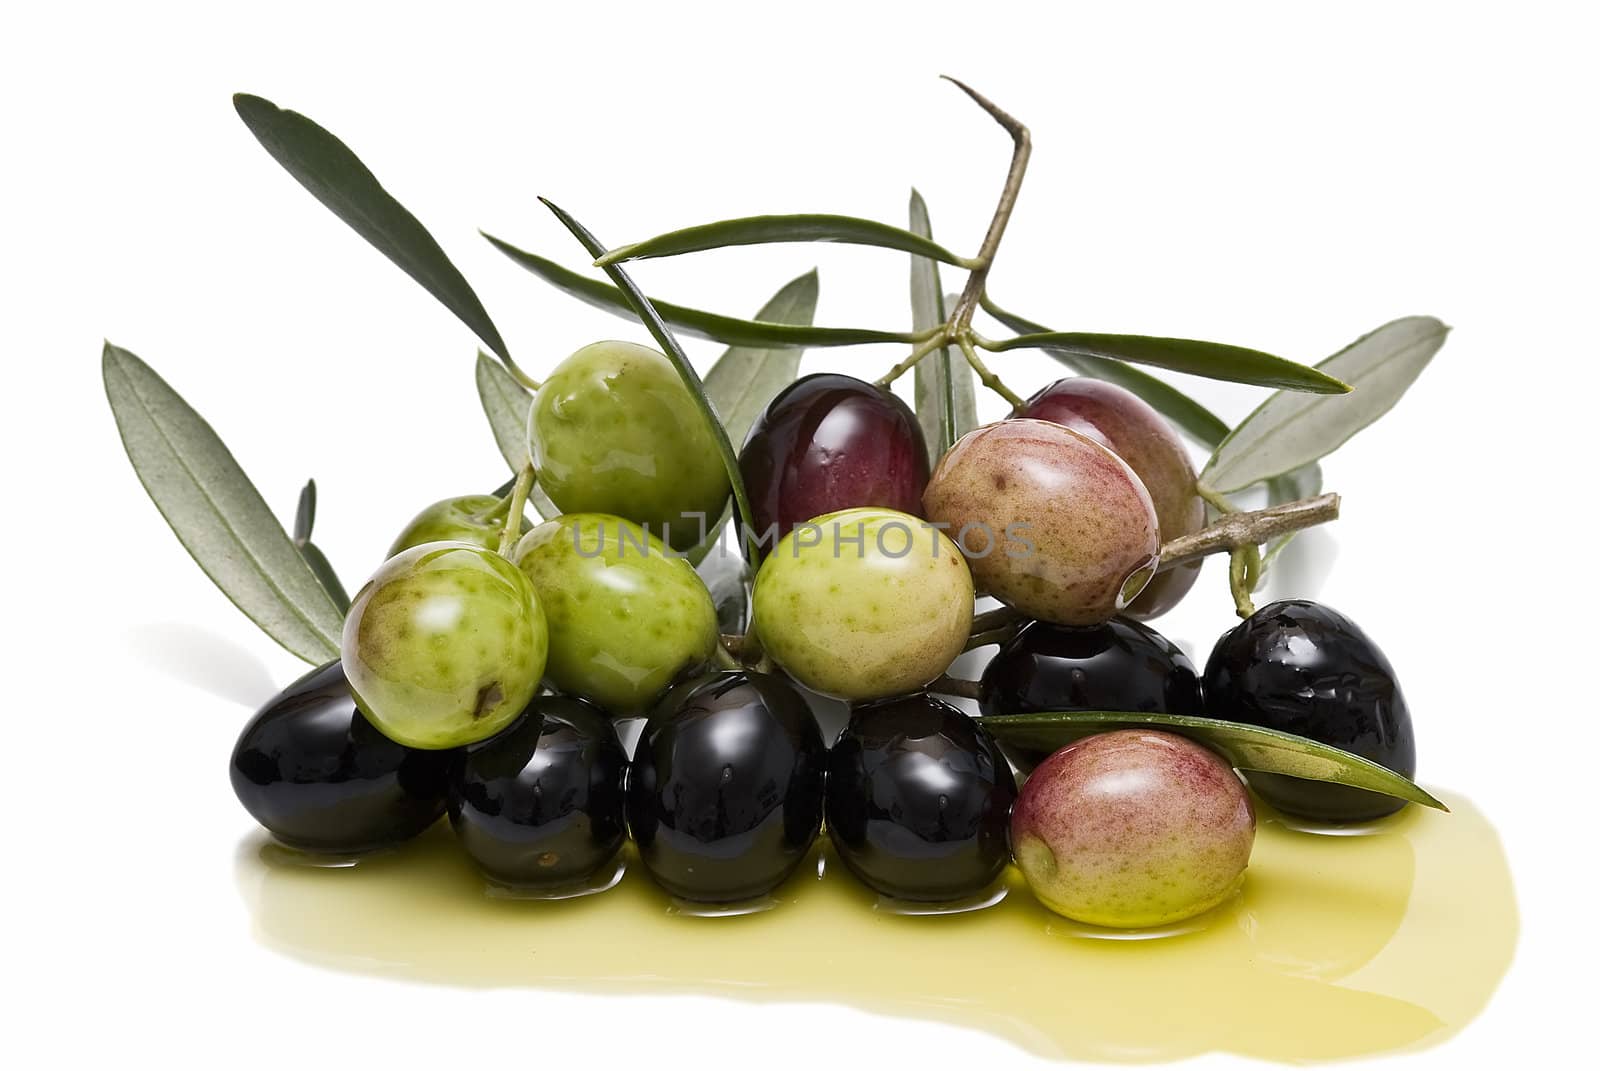 Olives and oil. by angelsimon